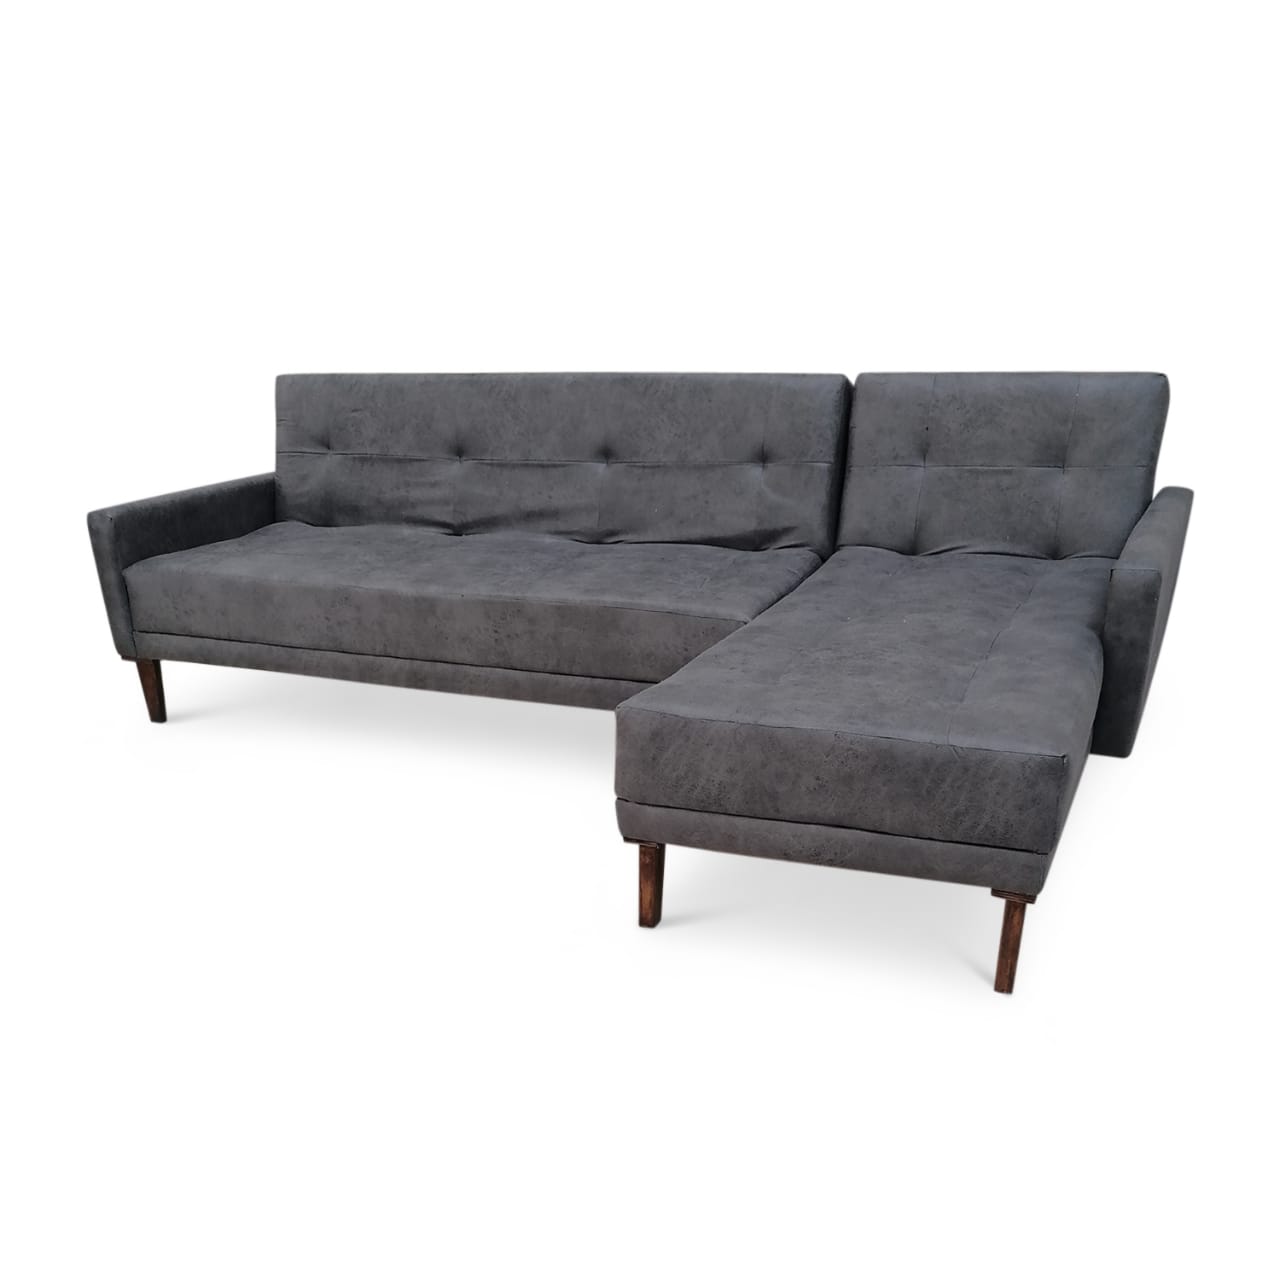 Large Family Sleeper Couch Black November - That Couch Place